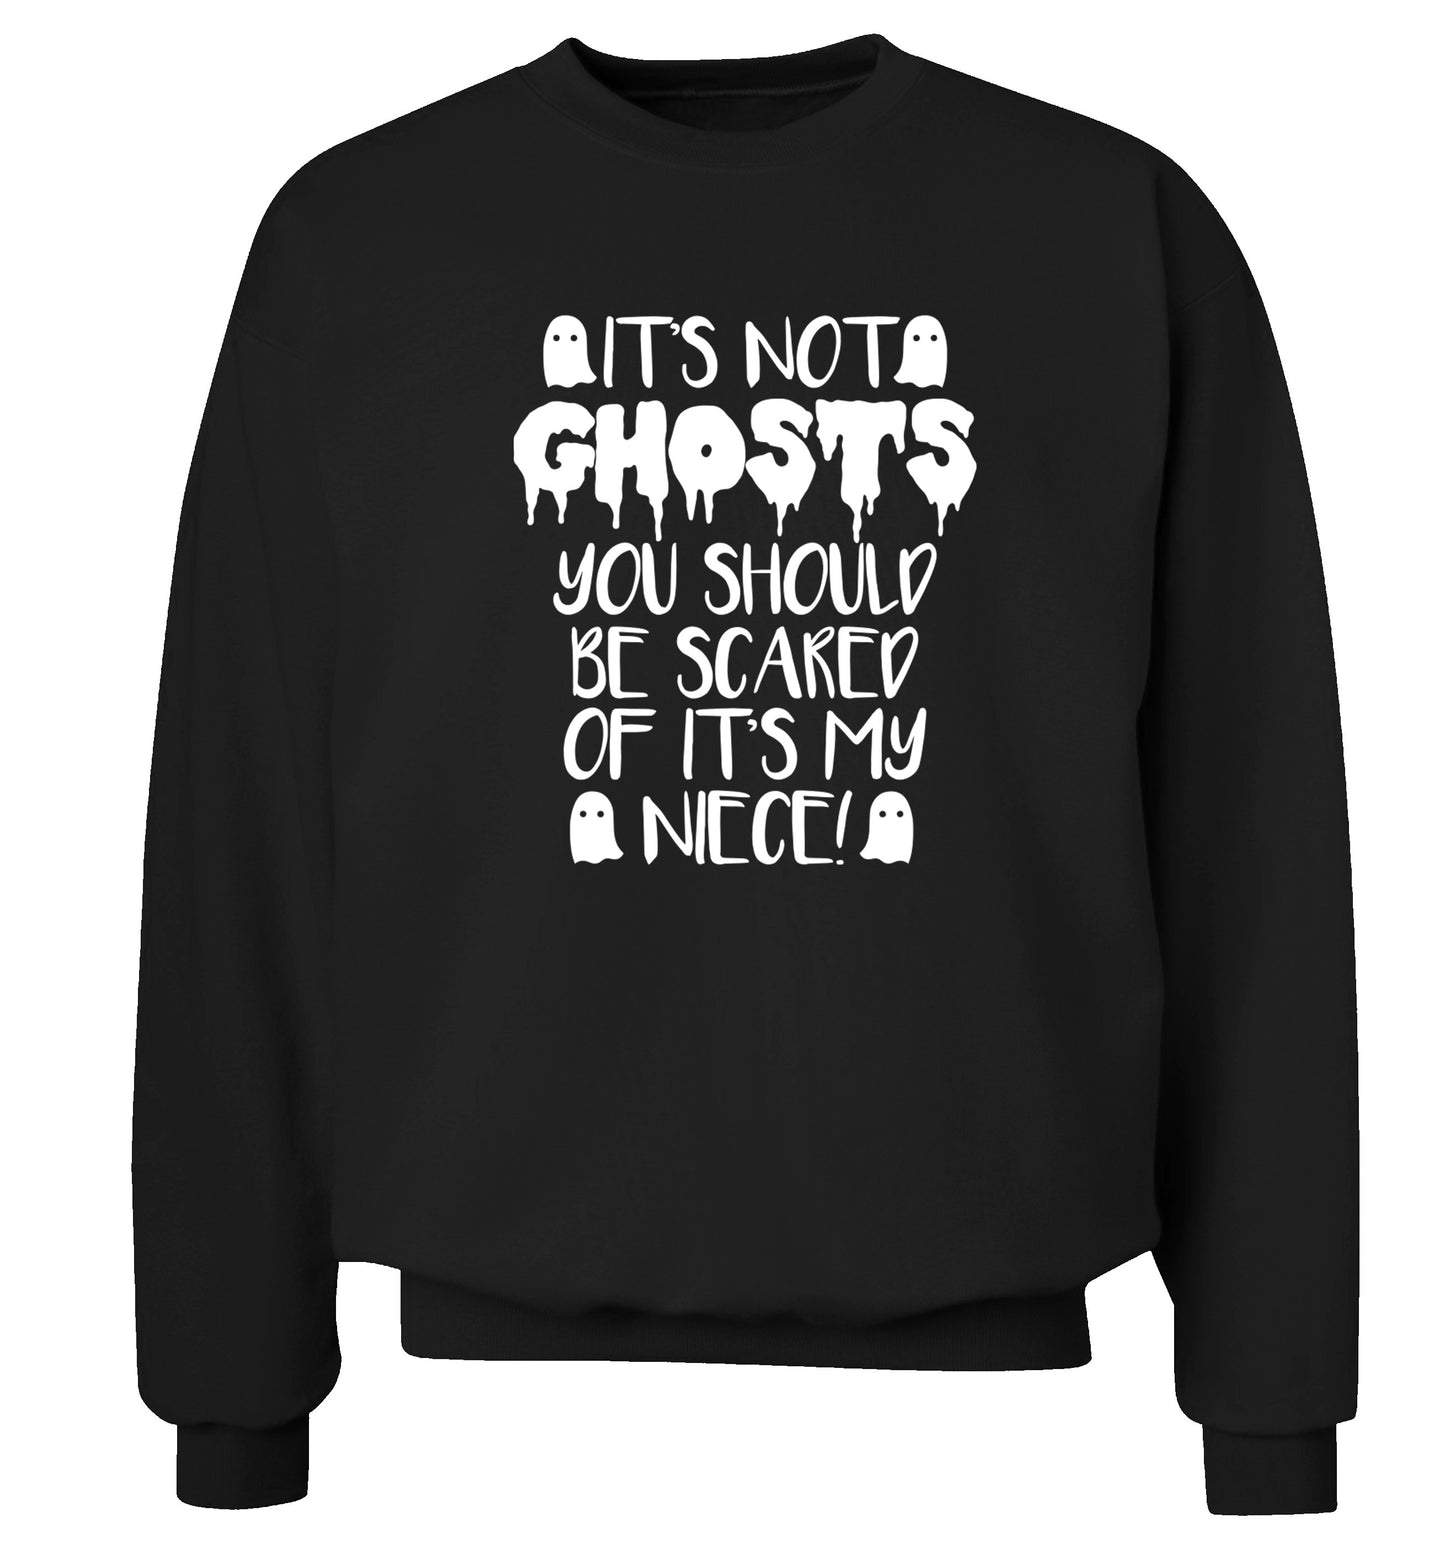 It's not ghosts you should be scared of it's my niece! Adult's unisex black Sweater 2XL